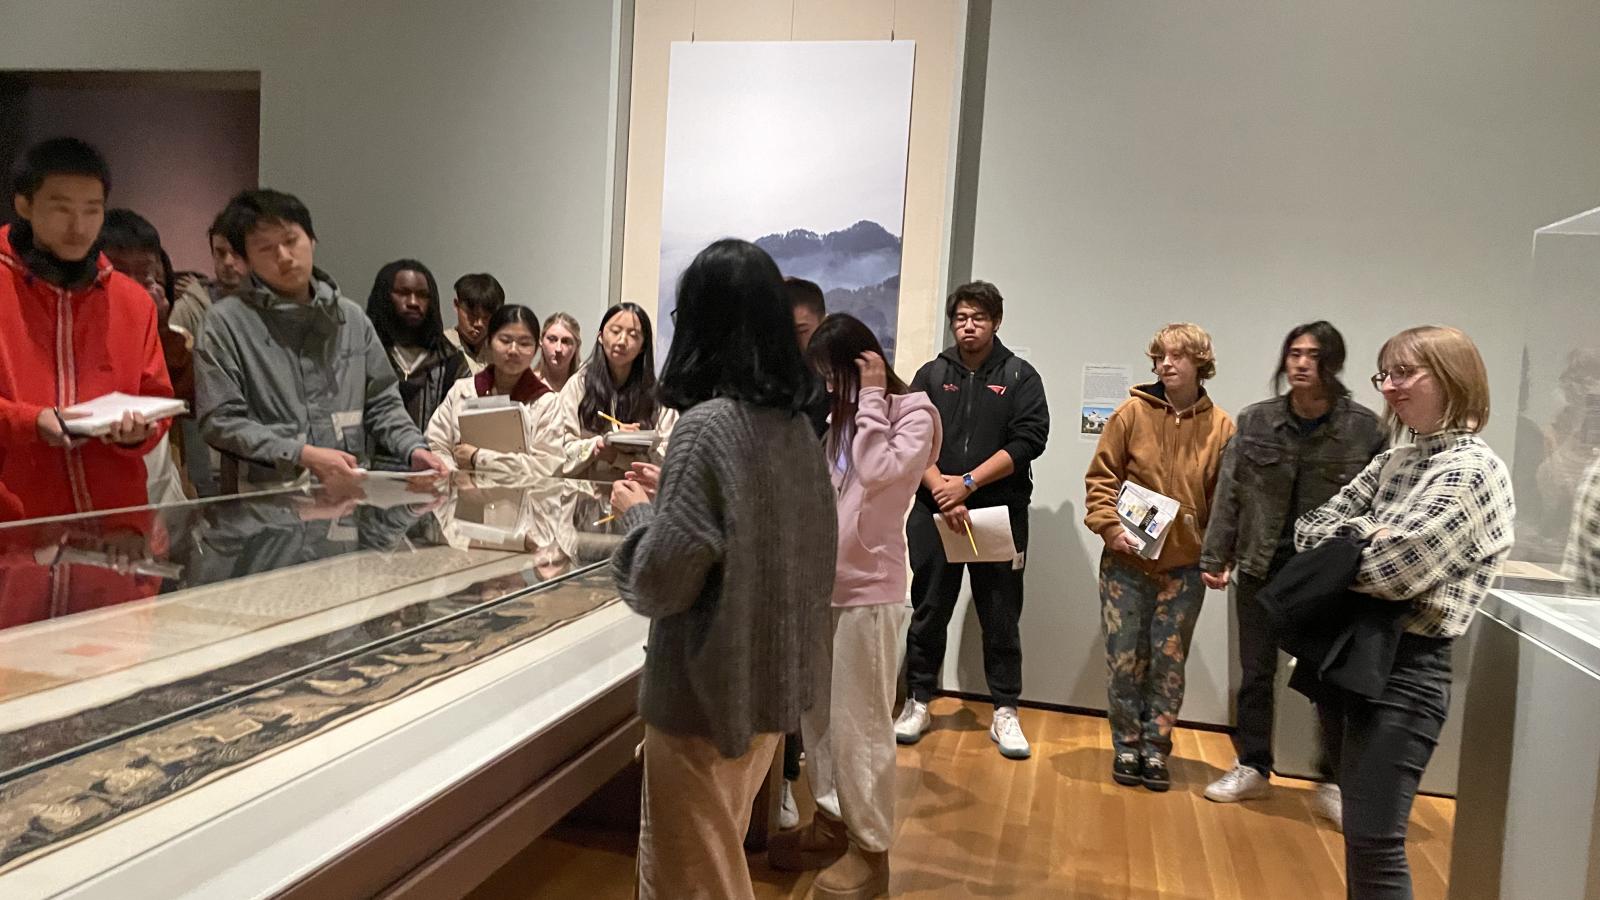 Professor Christina Burke Mathison and Class in the Cleveland Museum of Art